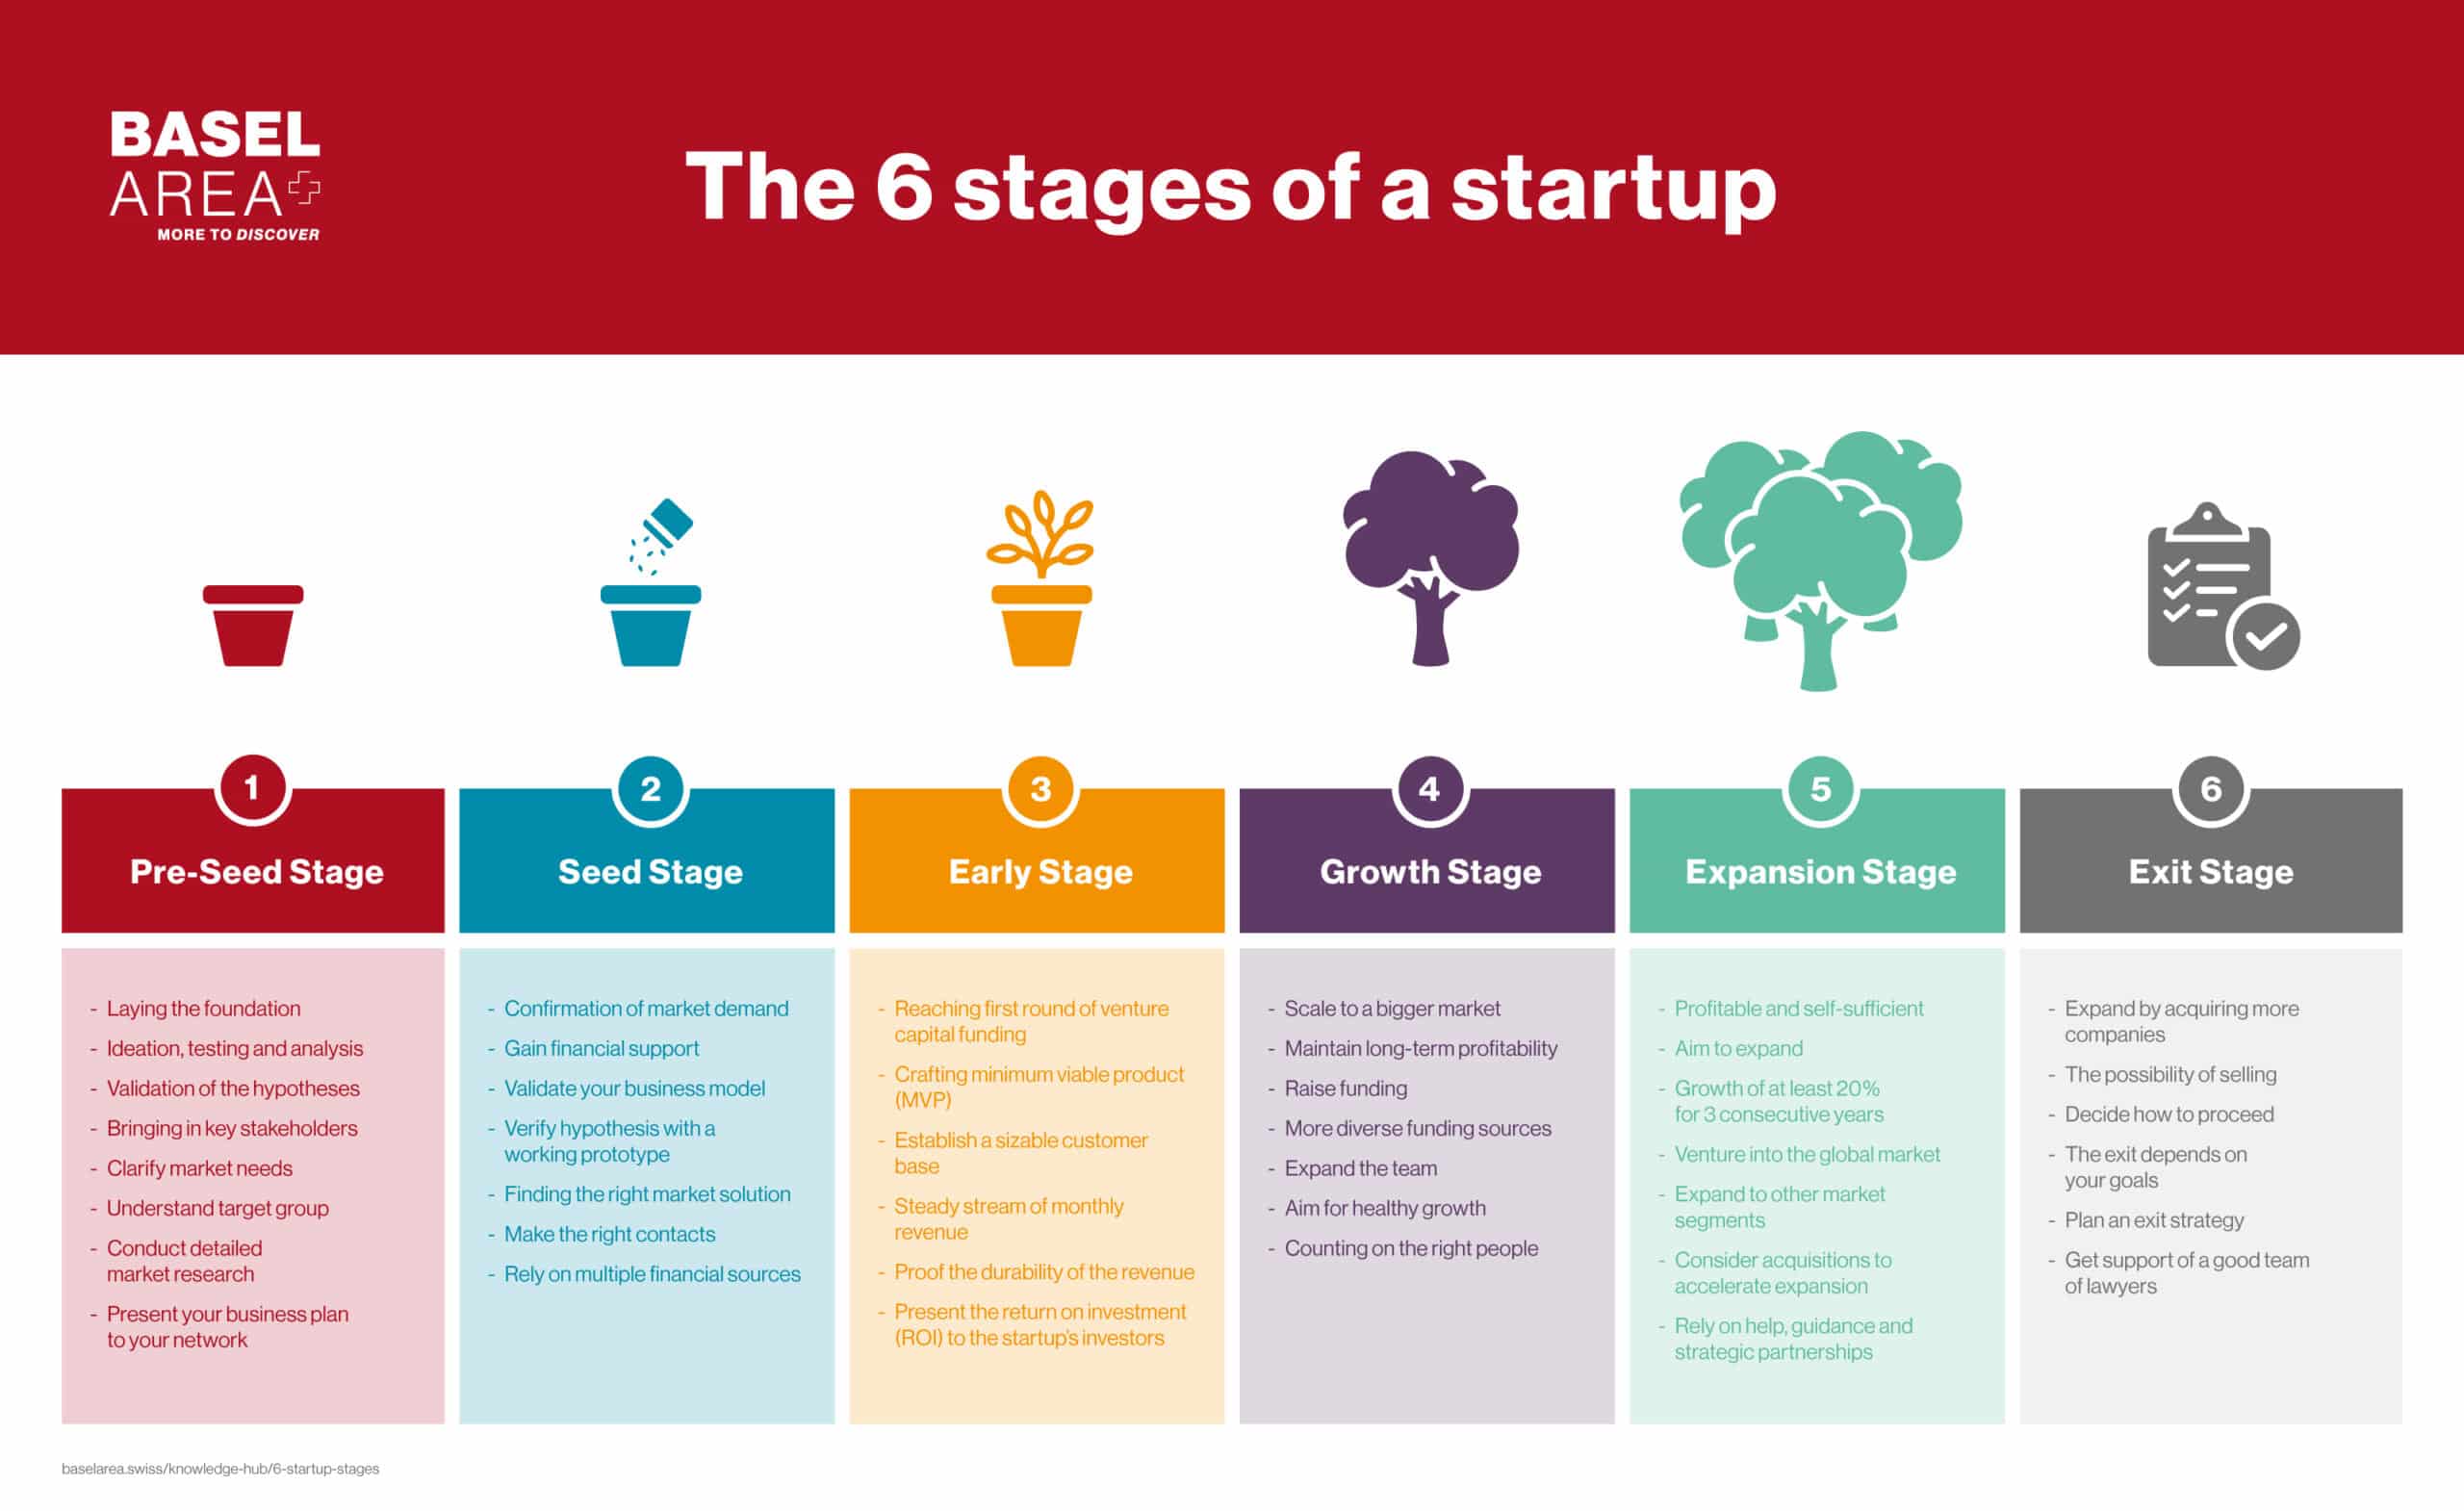 Six startup stages, 1. Pre-Seed stage. 2. Seed stage. 3. Early stage. 4. Growth stage. 5. Expansion stage. 6. Exit stage.